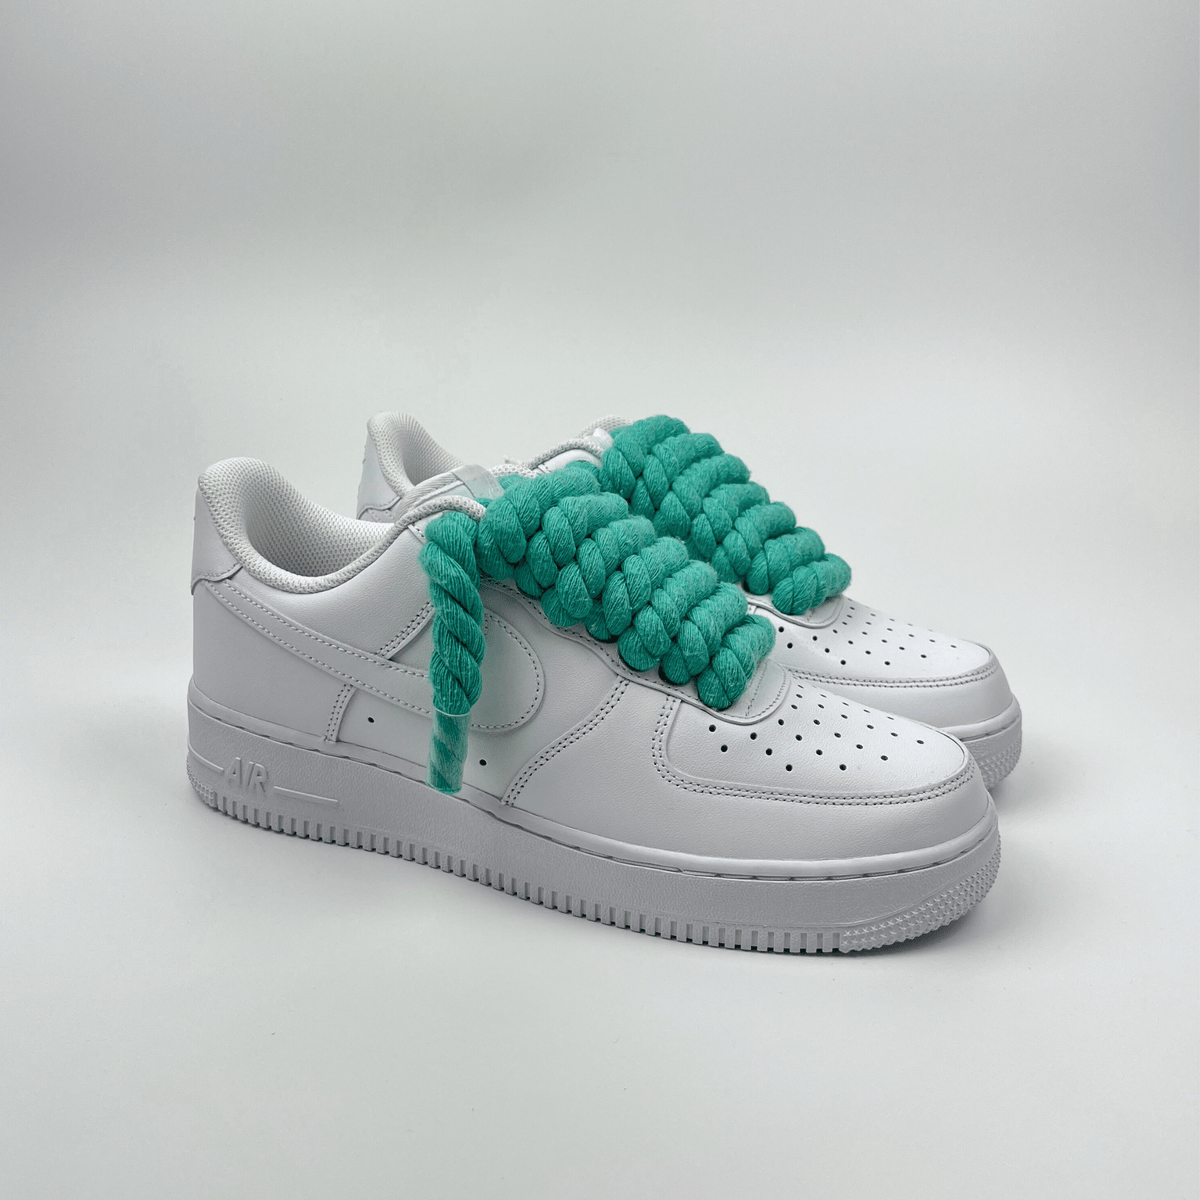 Rope Air Force 1 - Teal - No Sauce The Plug